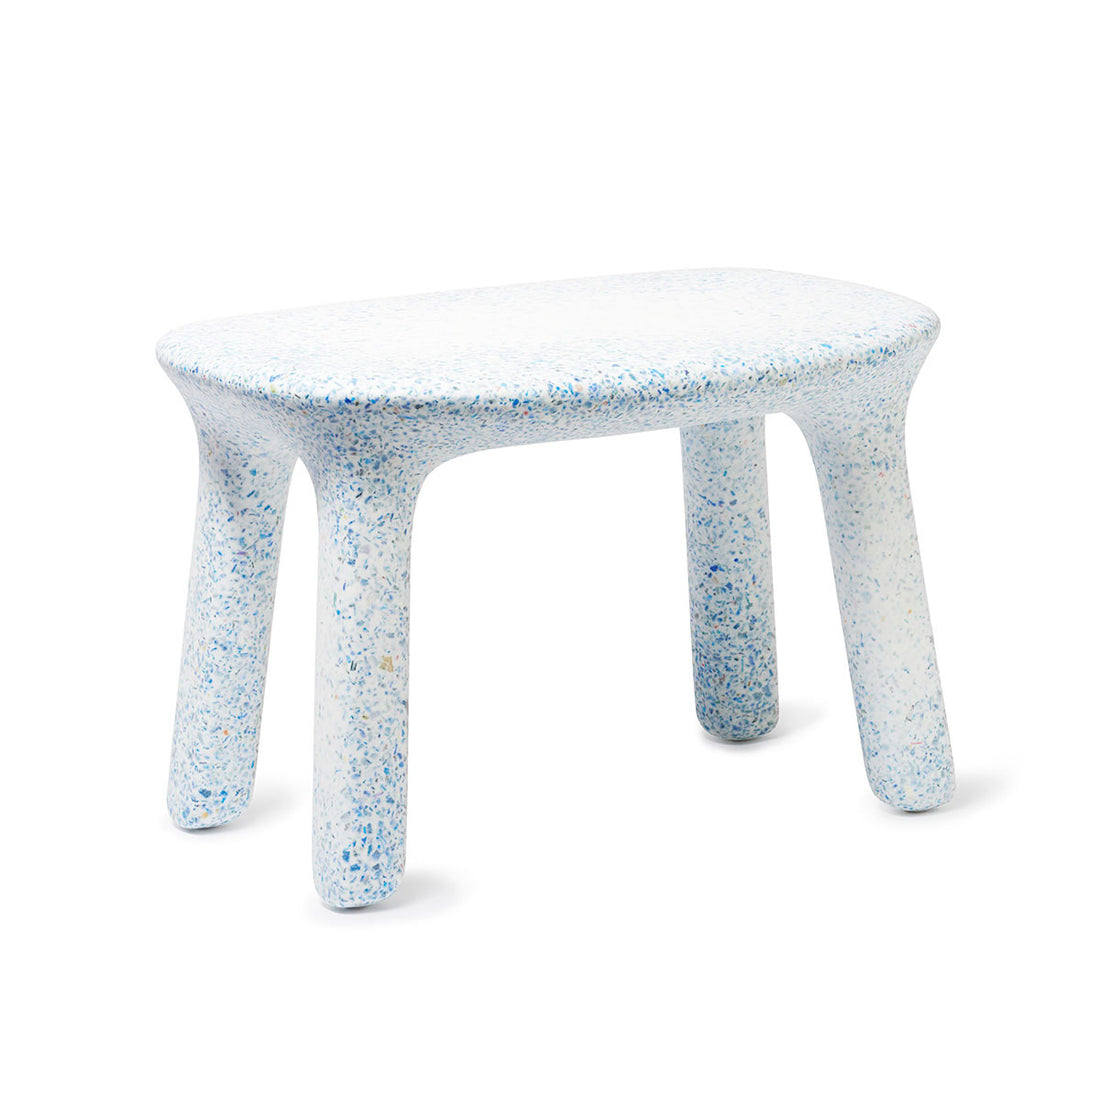 Luisa Table Ocean by ecoBirdy is the best recycled plastic table for the children&